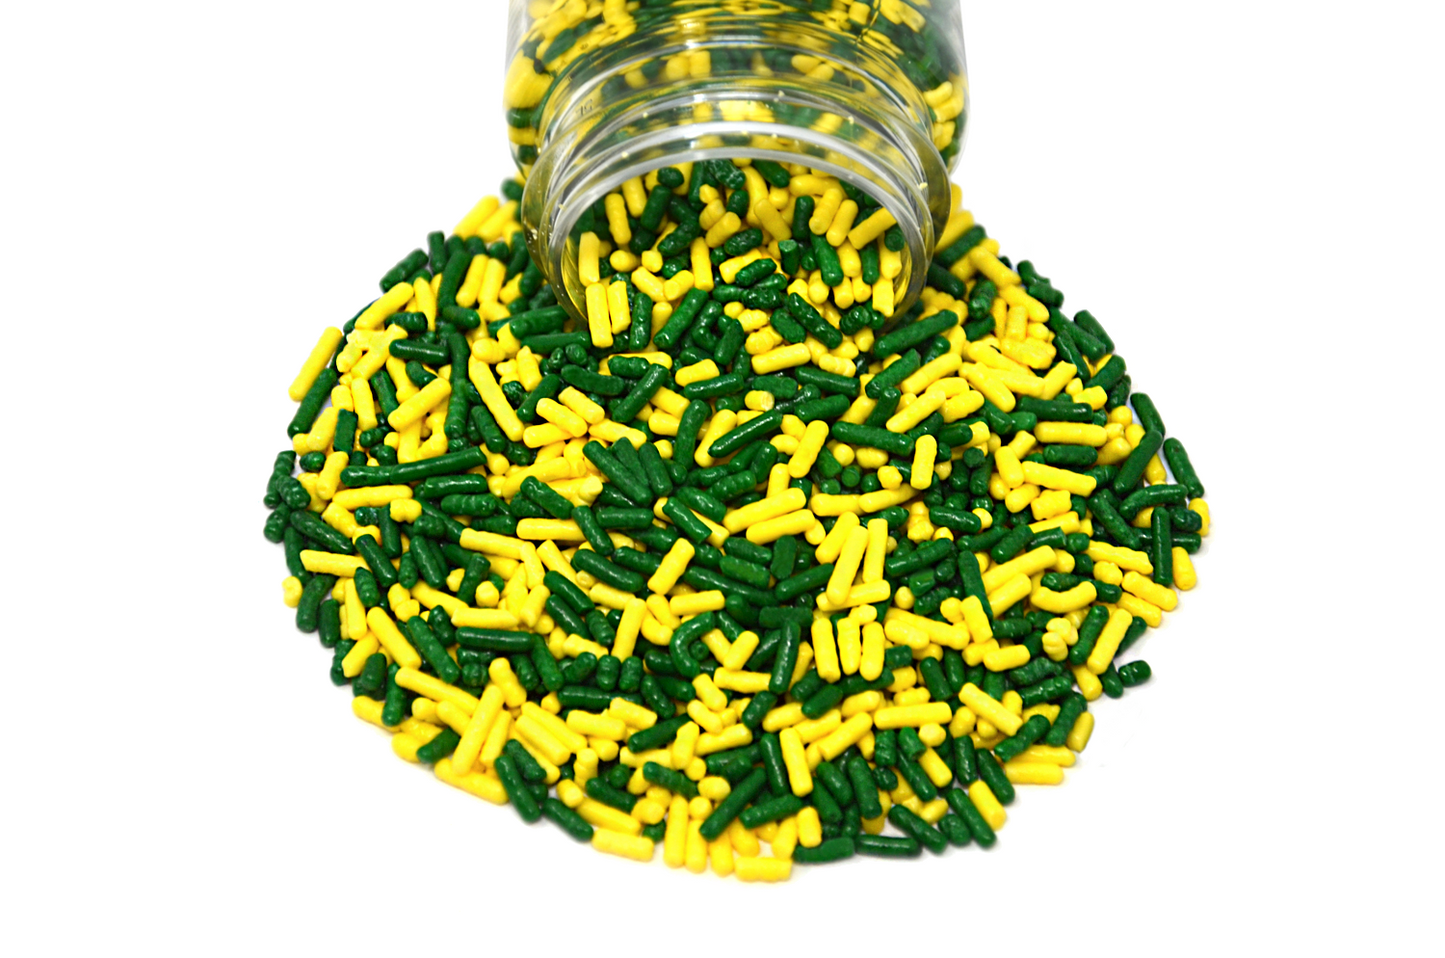 The Big Game: Green & Yellow Jimmy Mix 3oz Bottle